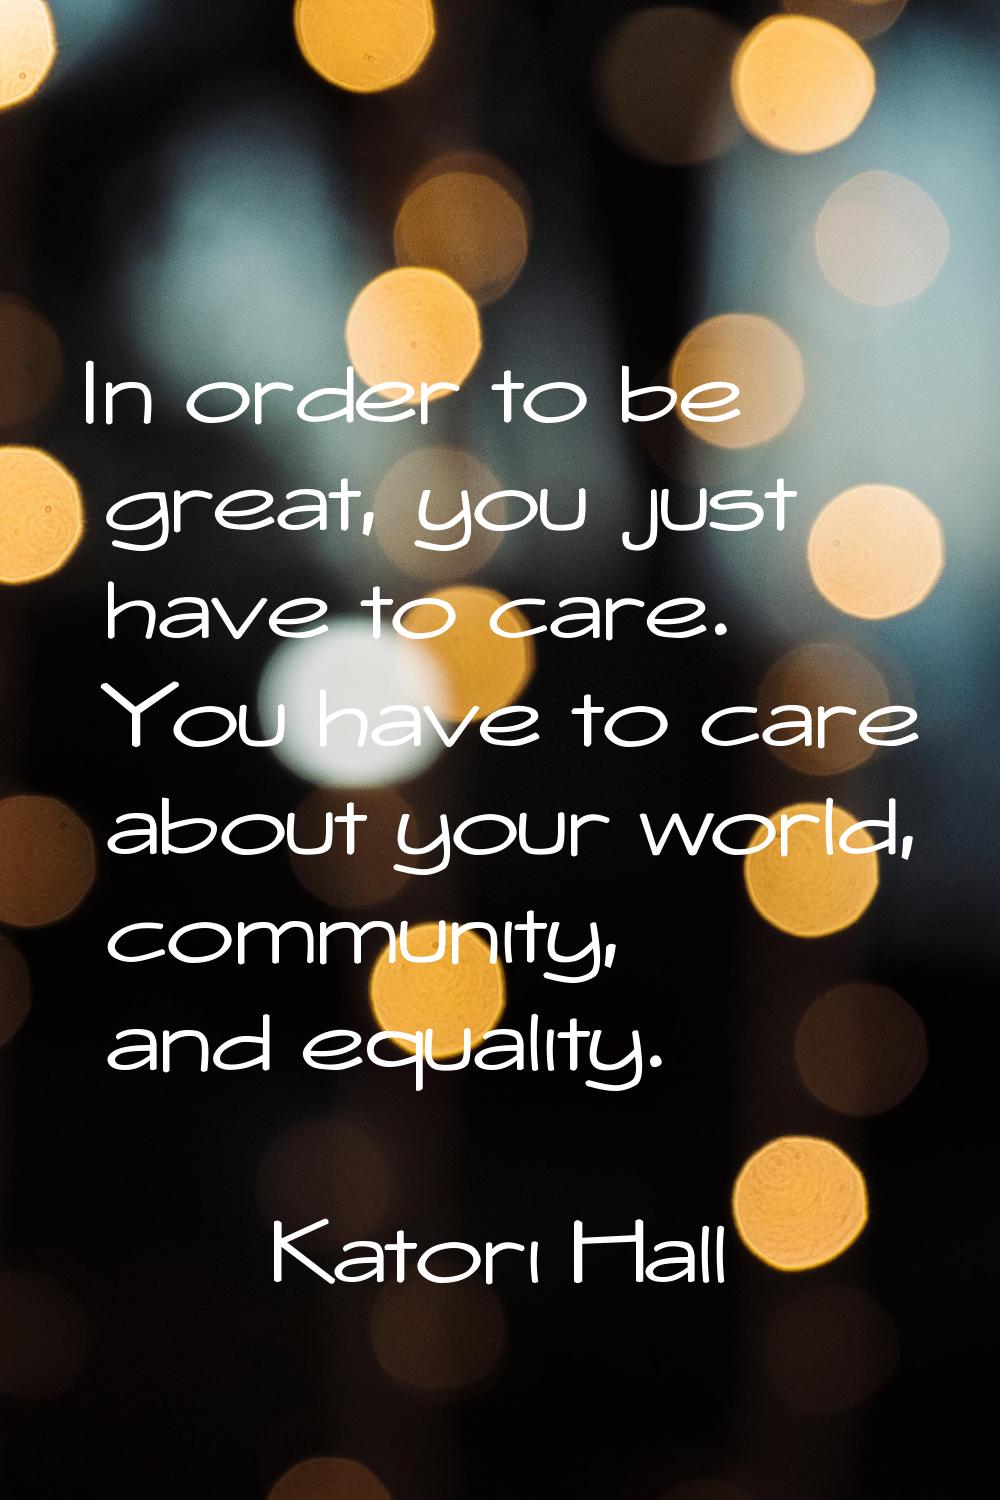 In order to be great, you just have to care. You have to care about your world, community, and equa